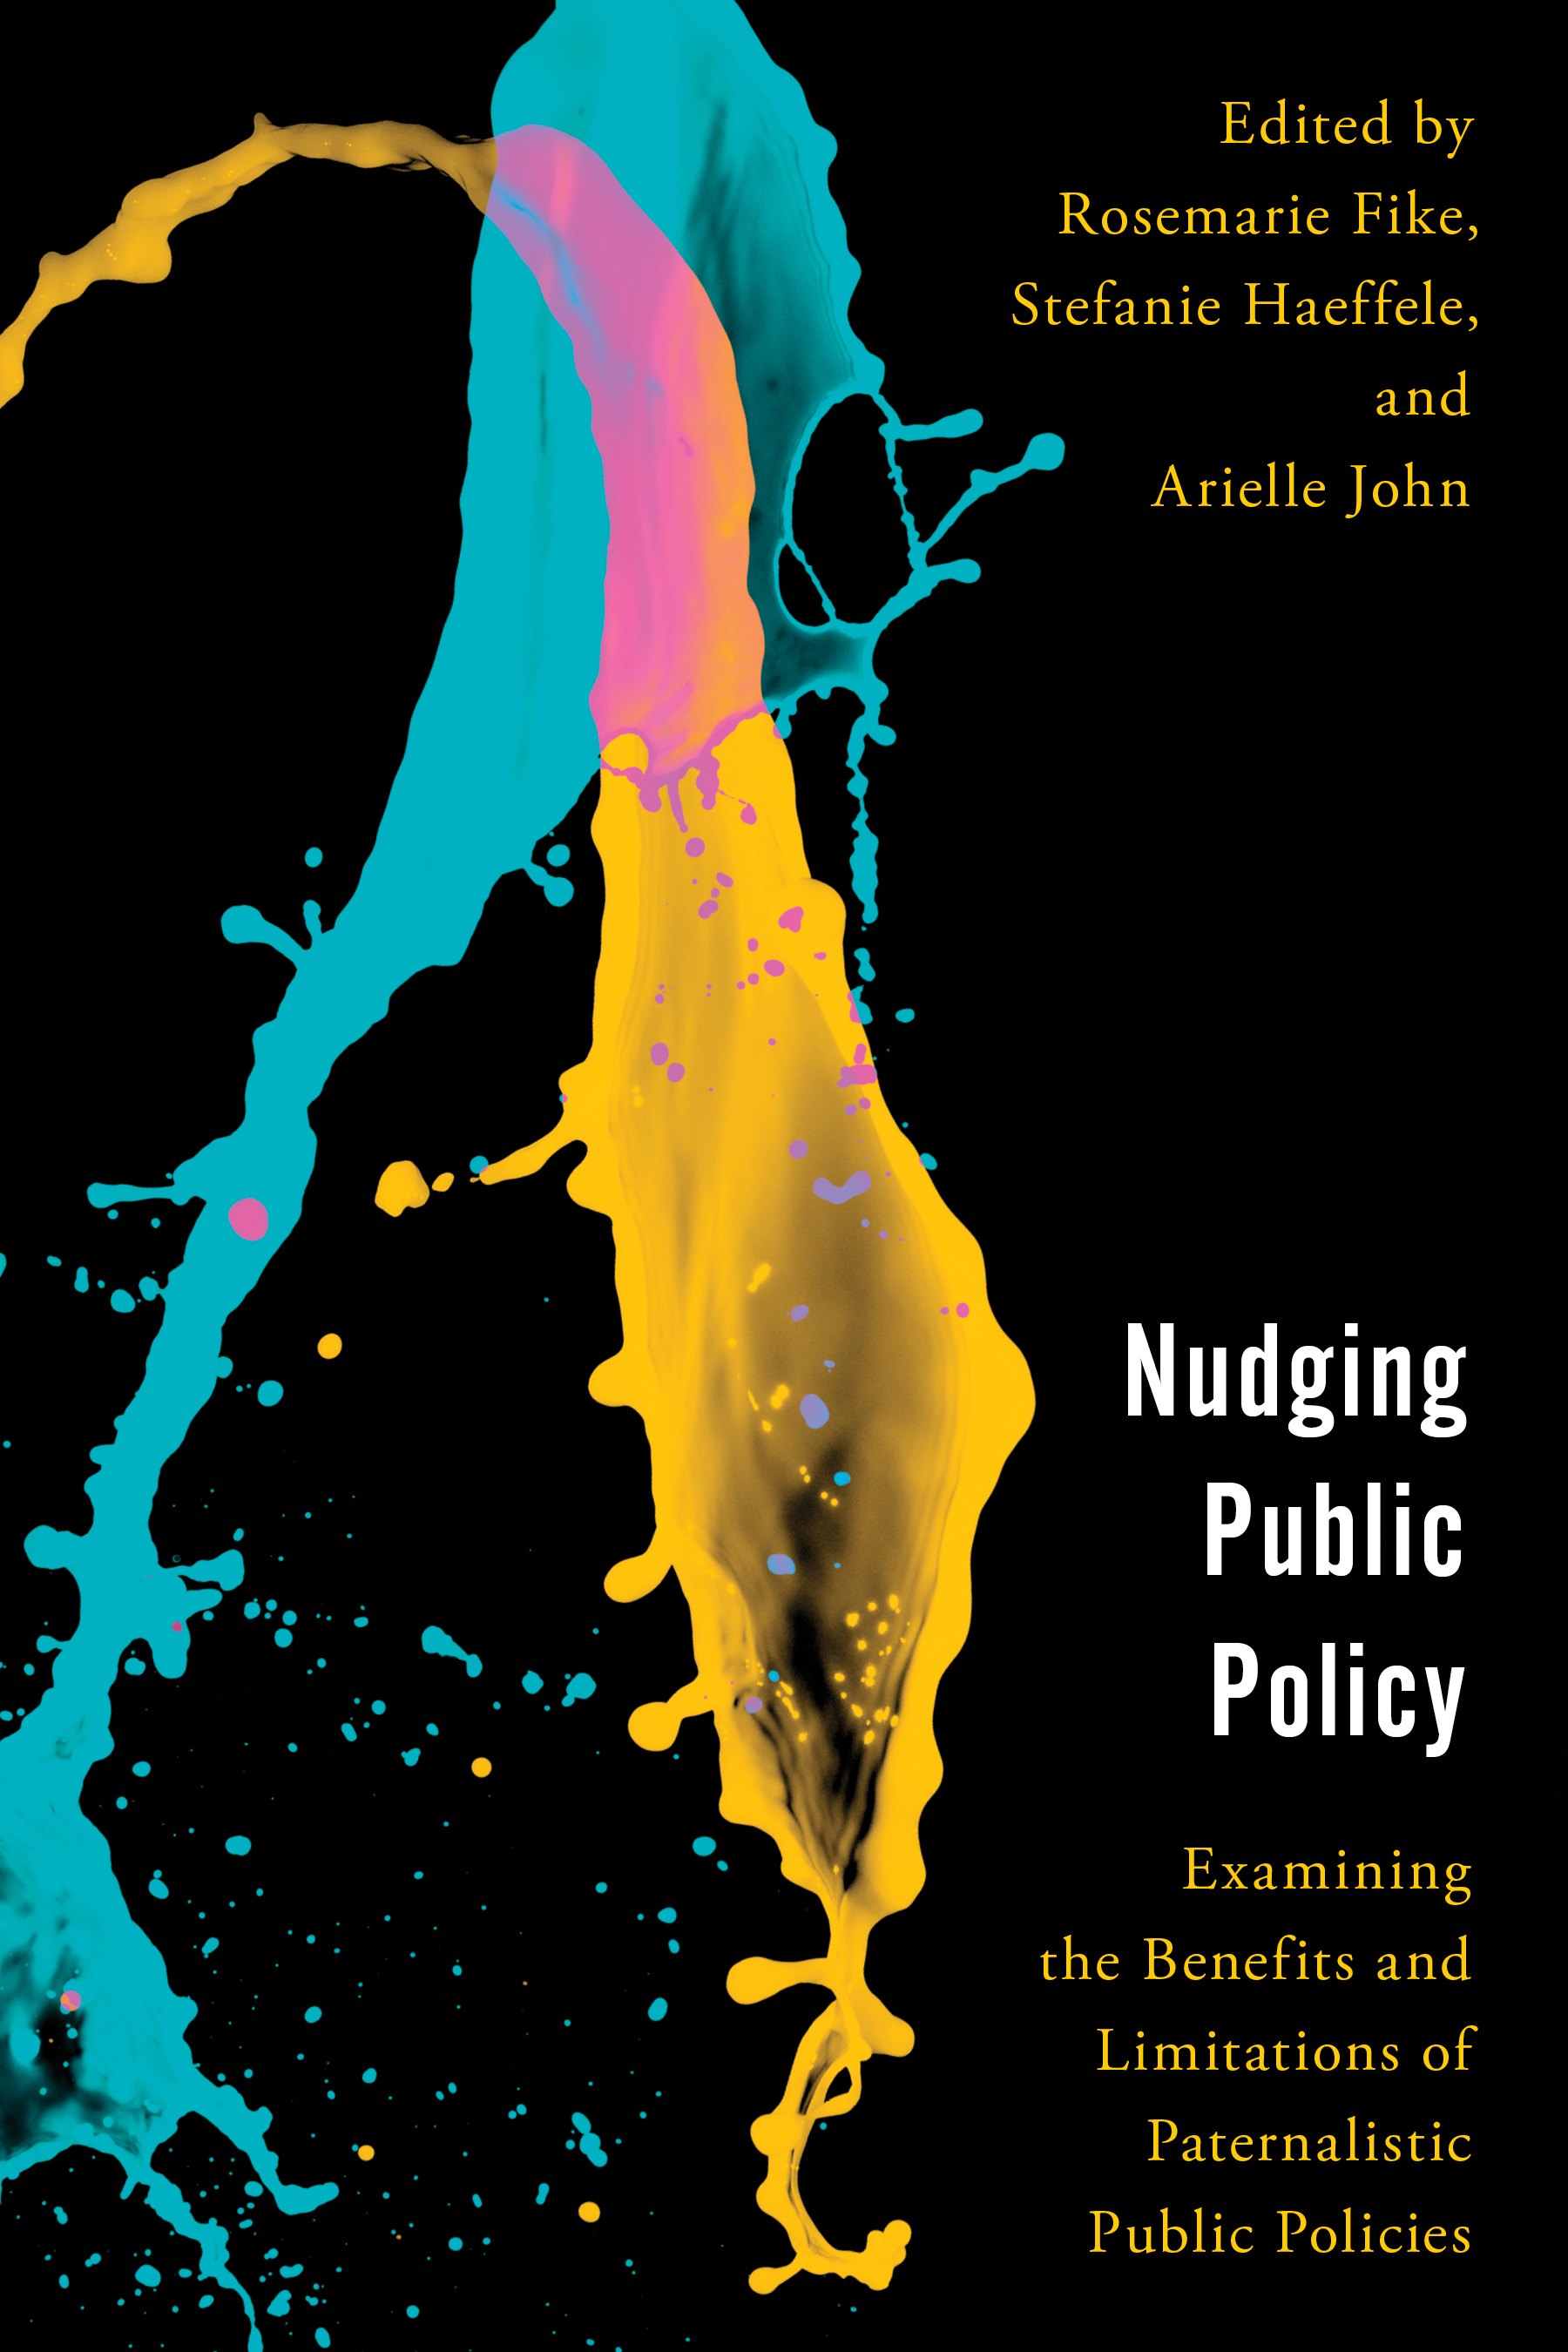 Nudging Public Policy: Examining the Benefits and Limitations of Paternalistic Public Policies